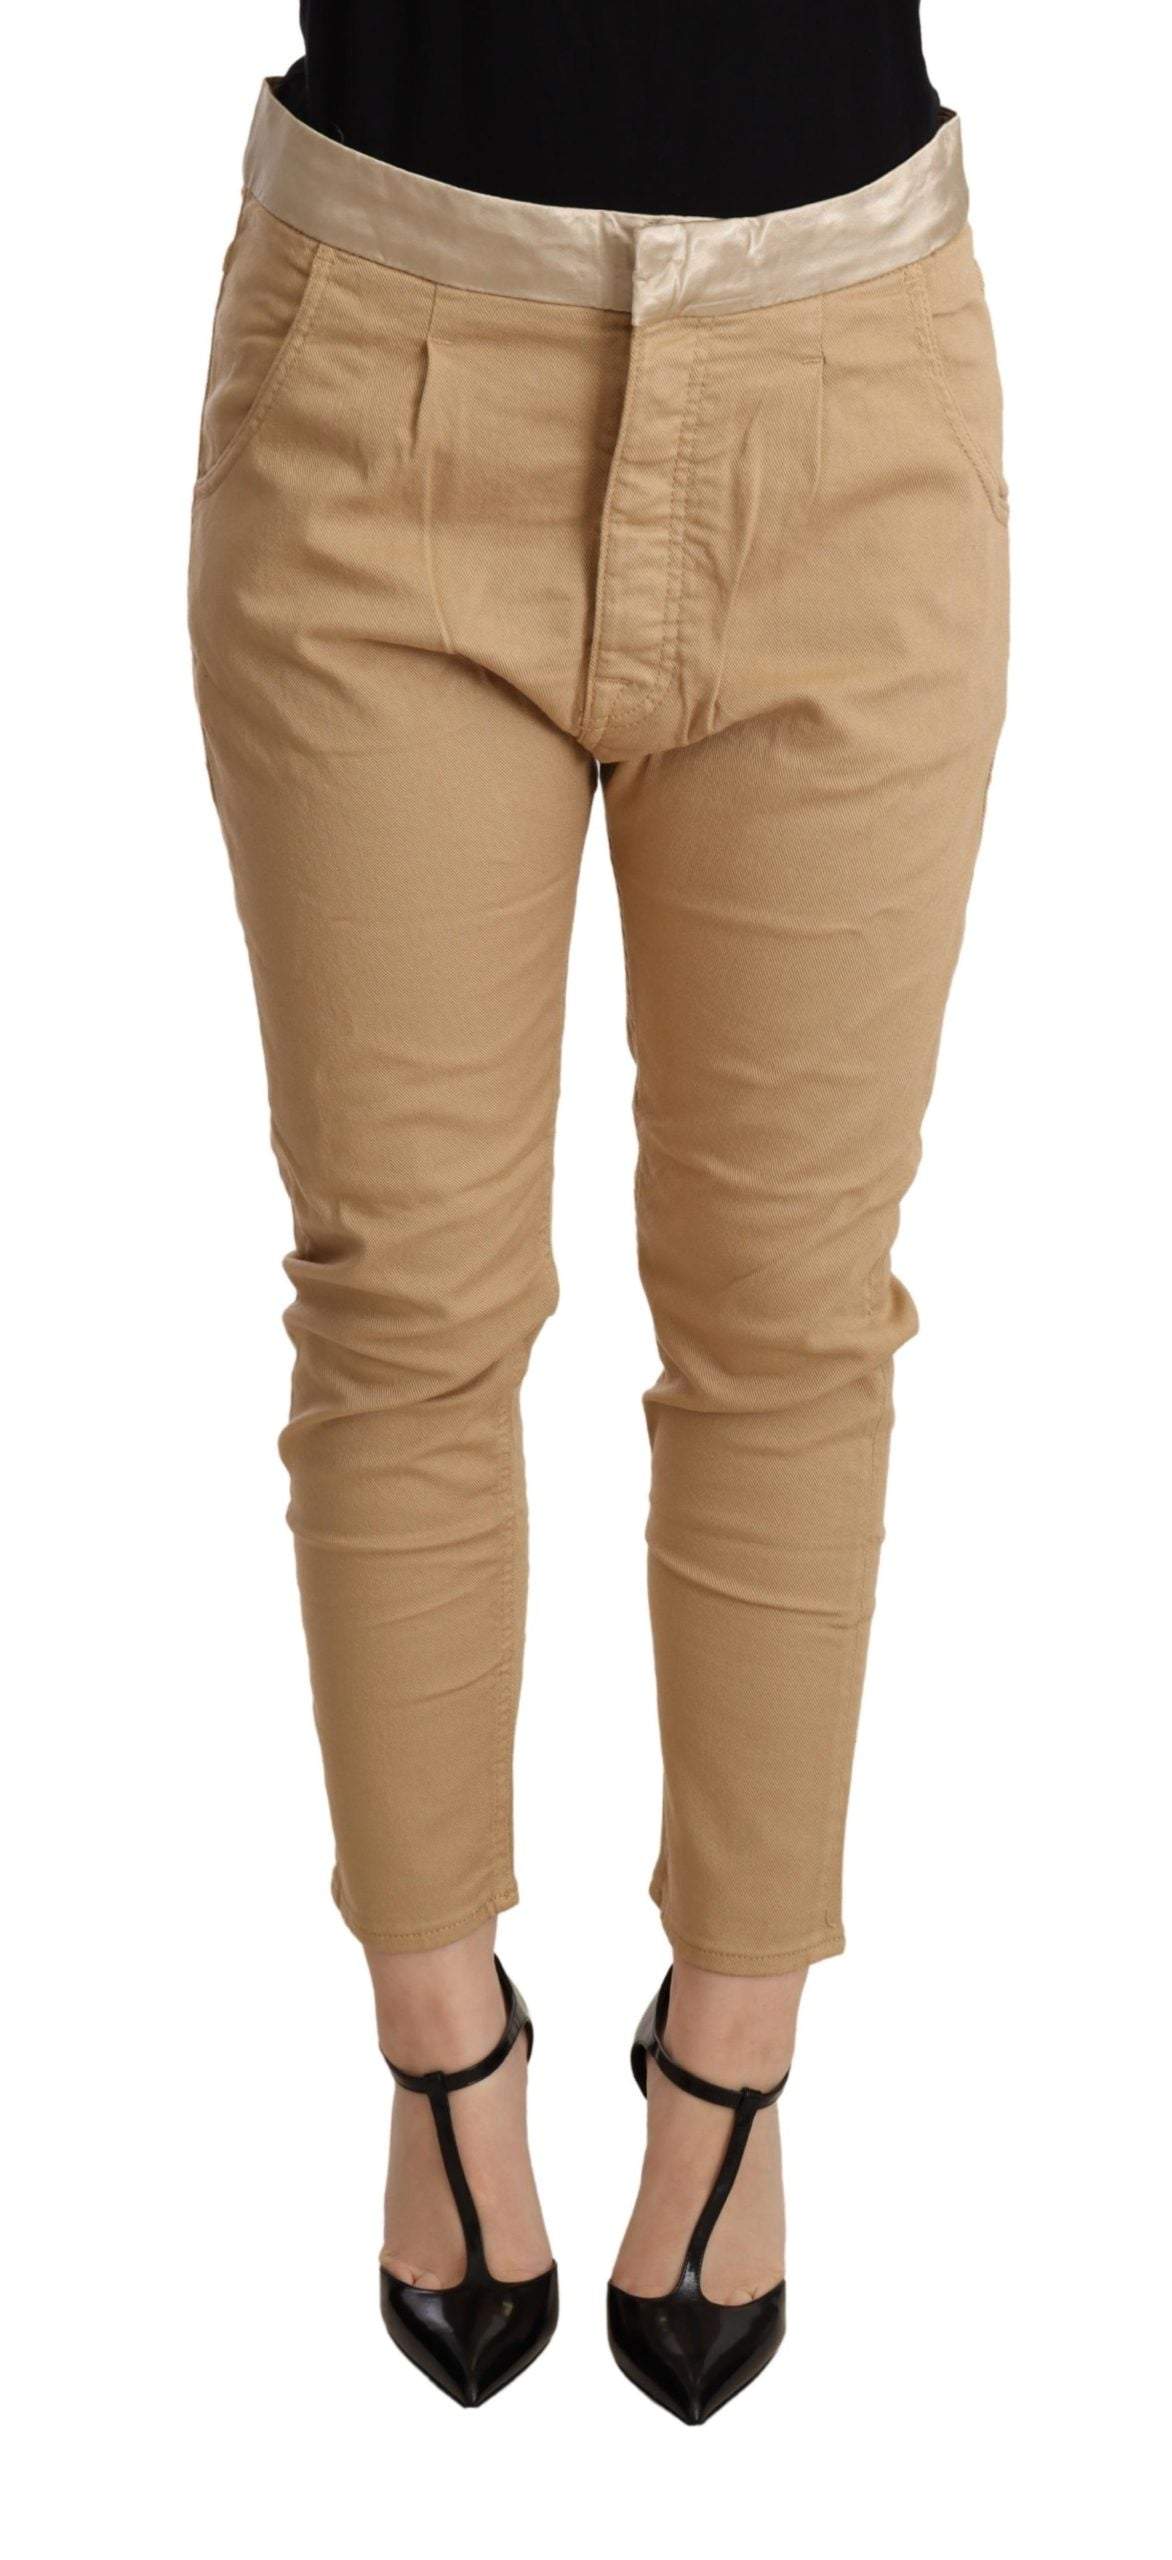 CYCLE Beige Mid Waist Slim Fit Skinny Stretch Trouser Beige, CYCLE, feed-agegroup-adult, feed-color-Beige, feed-gender-female, Jeans & Pants - Women - Clothing, W26, W28 at SEYMAYKA